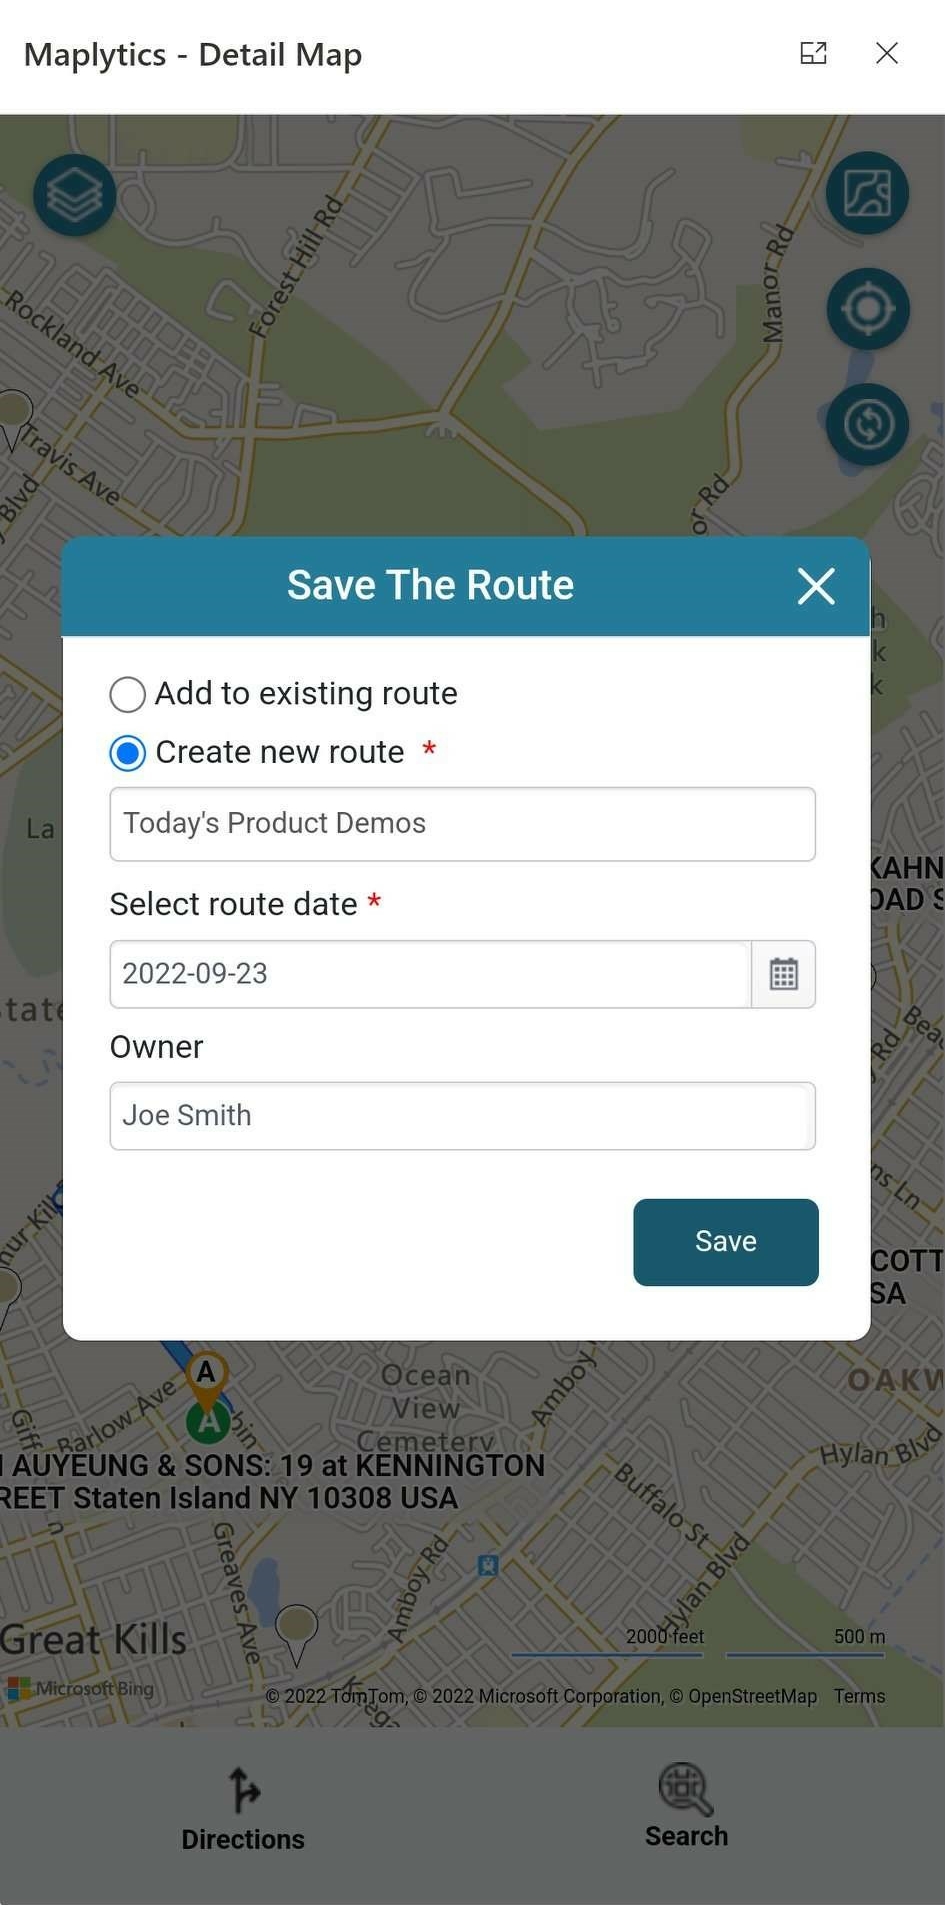 Maps Integration in an all-new avatar within Microsoft Dynamics 365 Mobile App 16